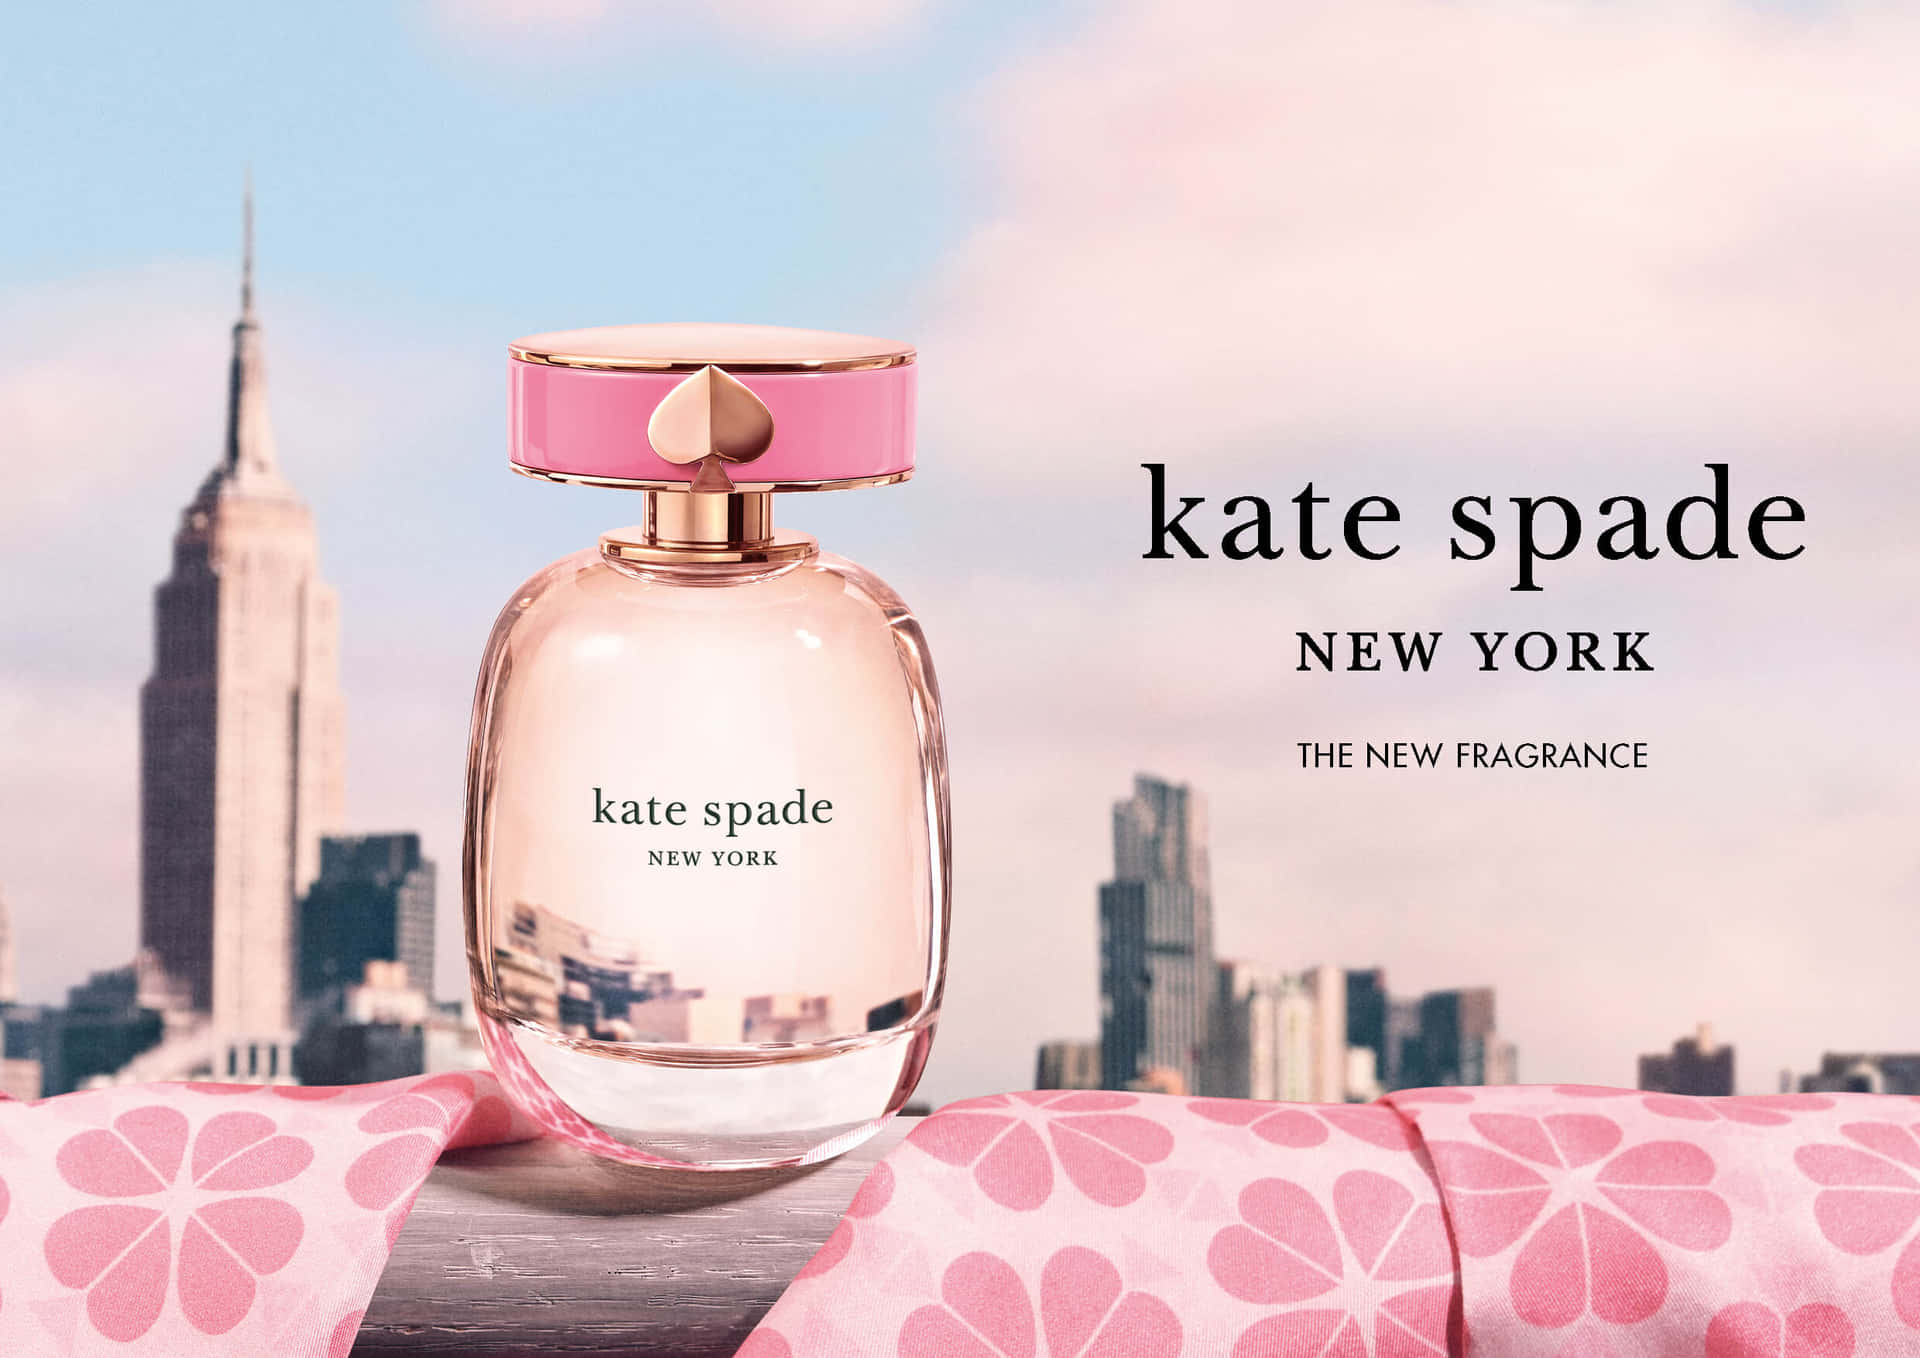 Express your unique style with Kate Spade